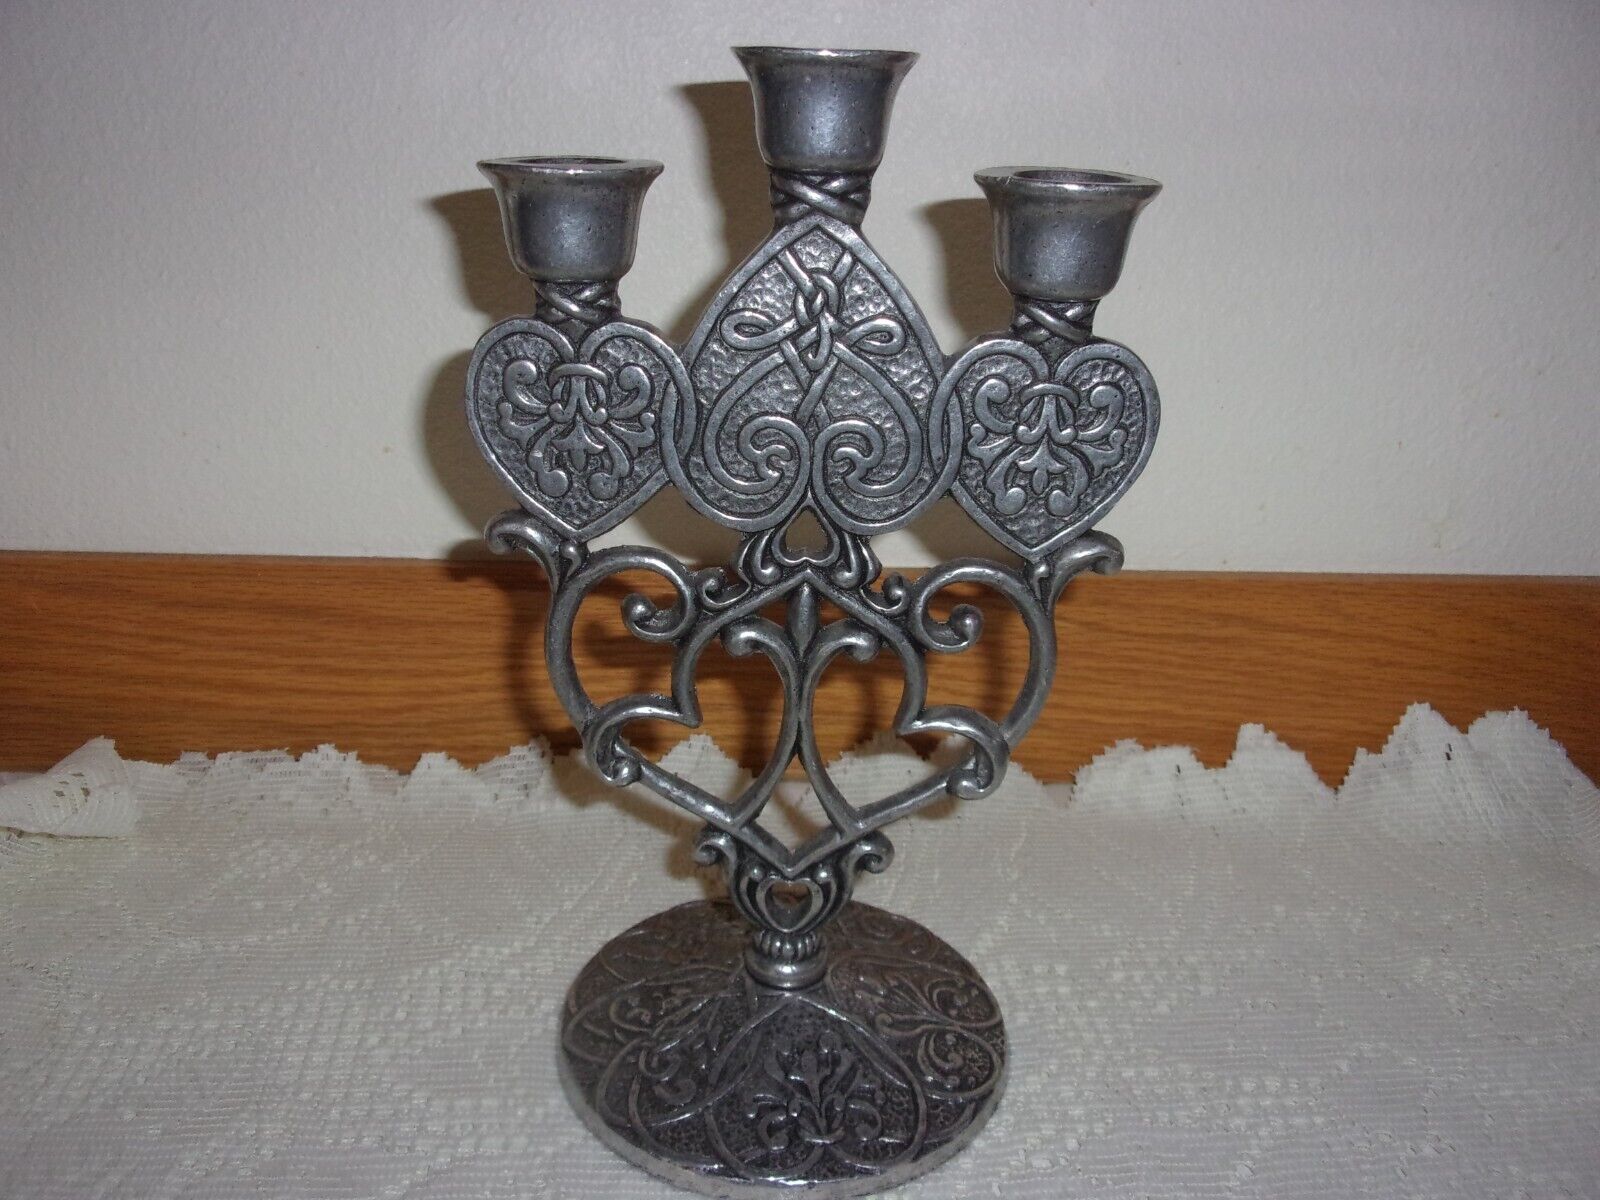 NEW Forevermore 1996 Kimberly McSparran Carson Pewter 3 Candle Holder Candelabra